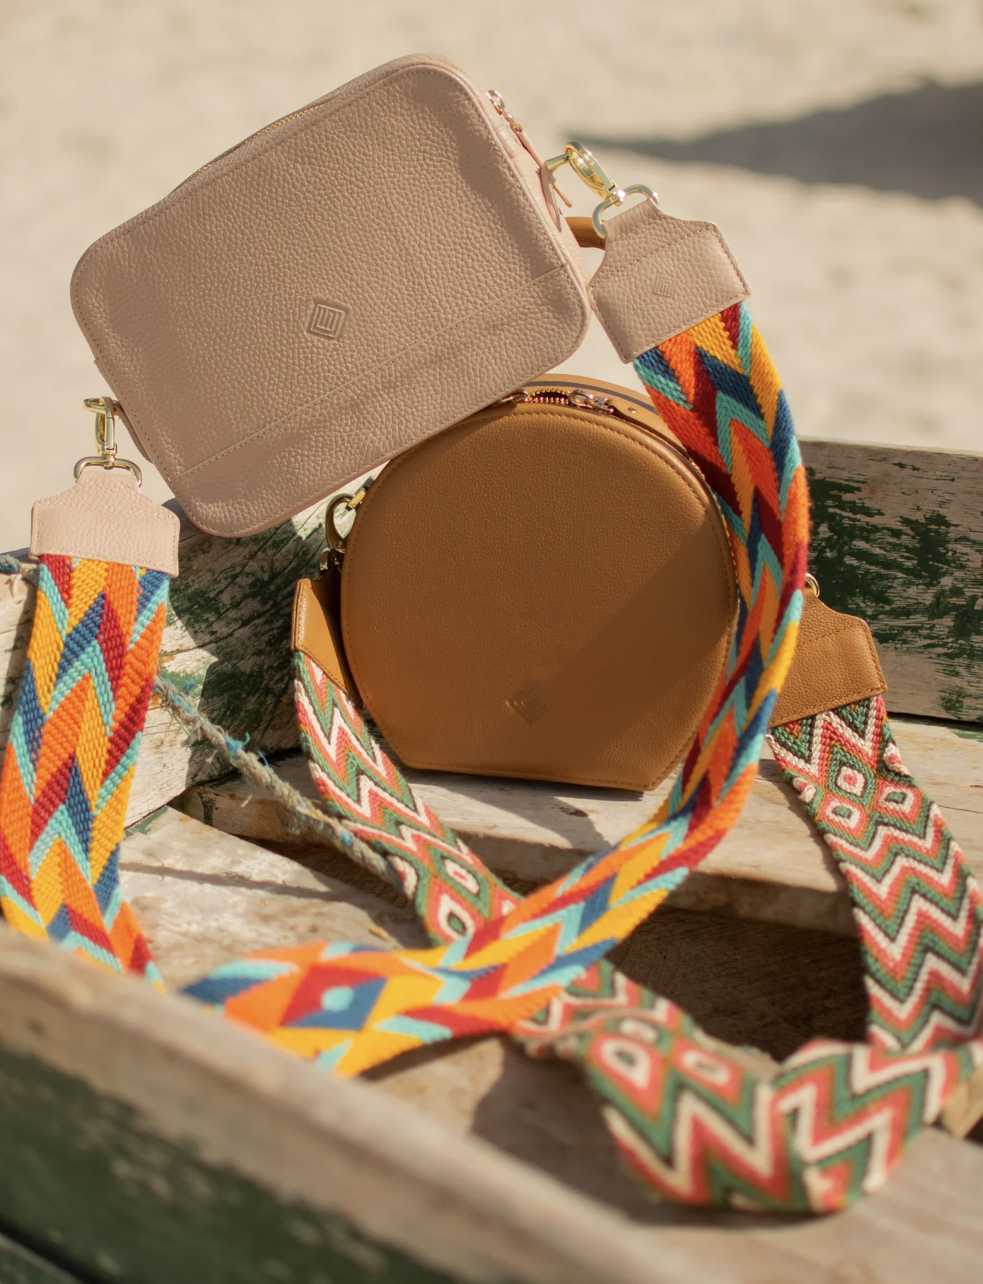 Catalina Straps - bags and straps made by women artisans - sustainable holiday gifts